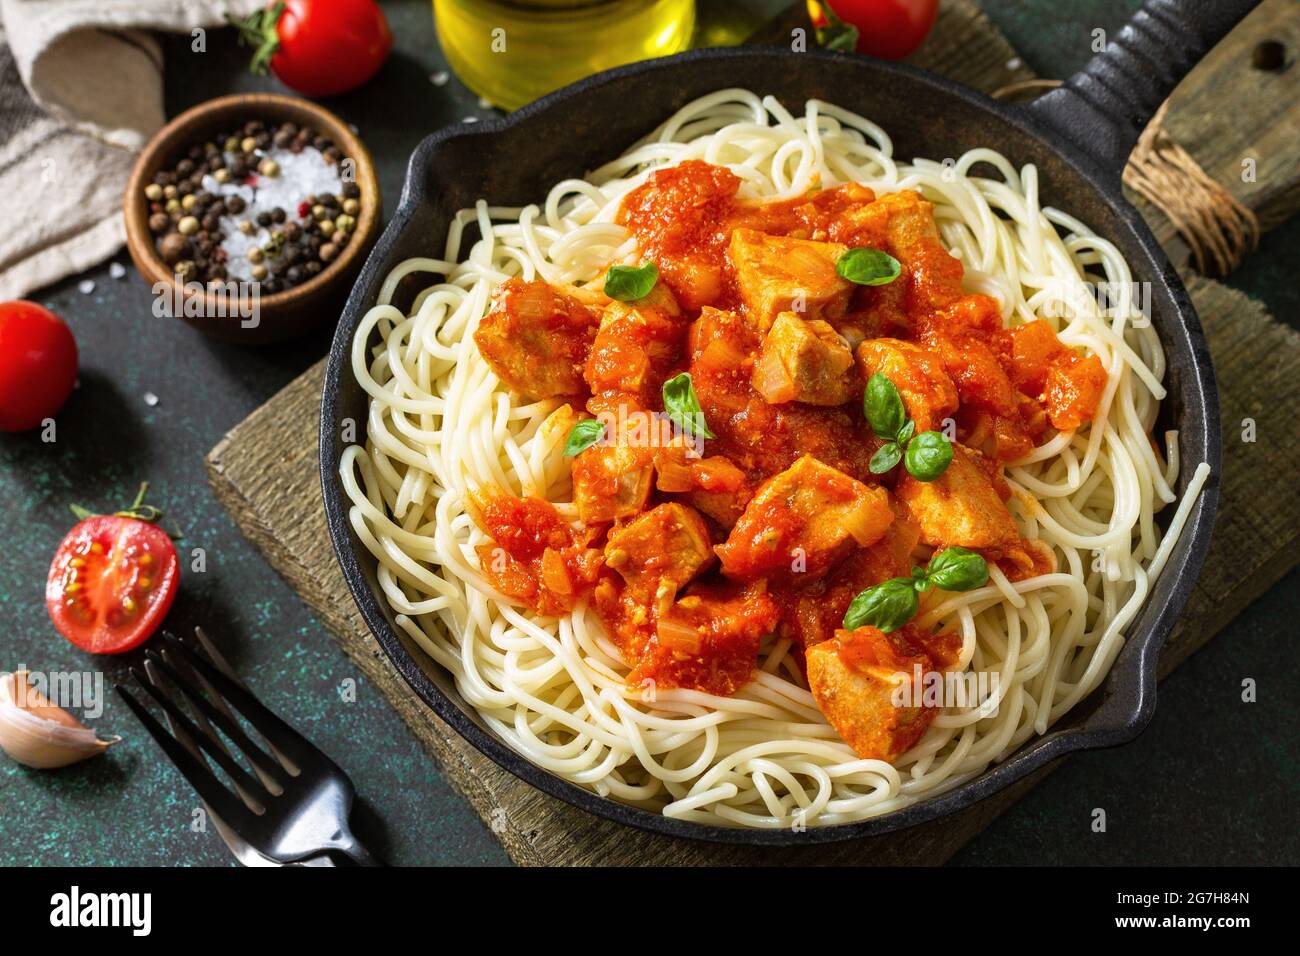 Healthy food, Italian pasta. Spaghetti with chicken and vegetables in  tomato sauce in a cast iron skillet on a stone countertop Stock Photo -  Alamy